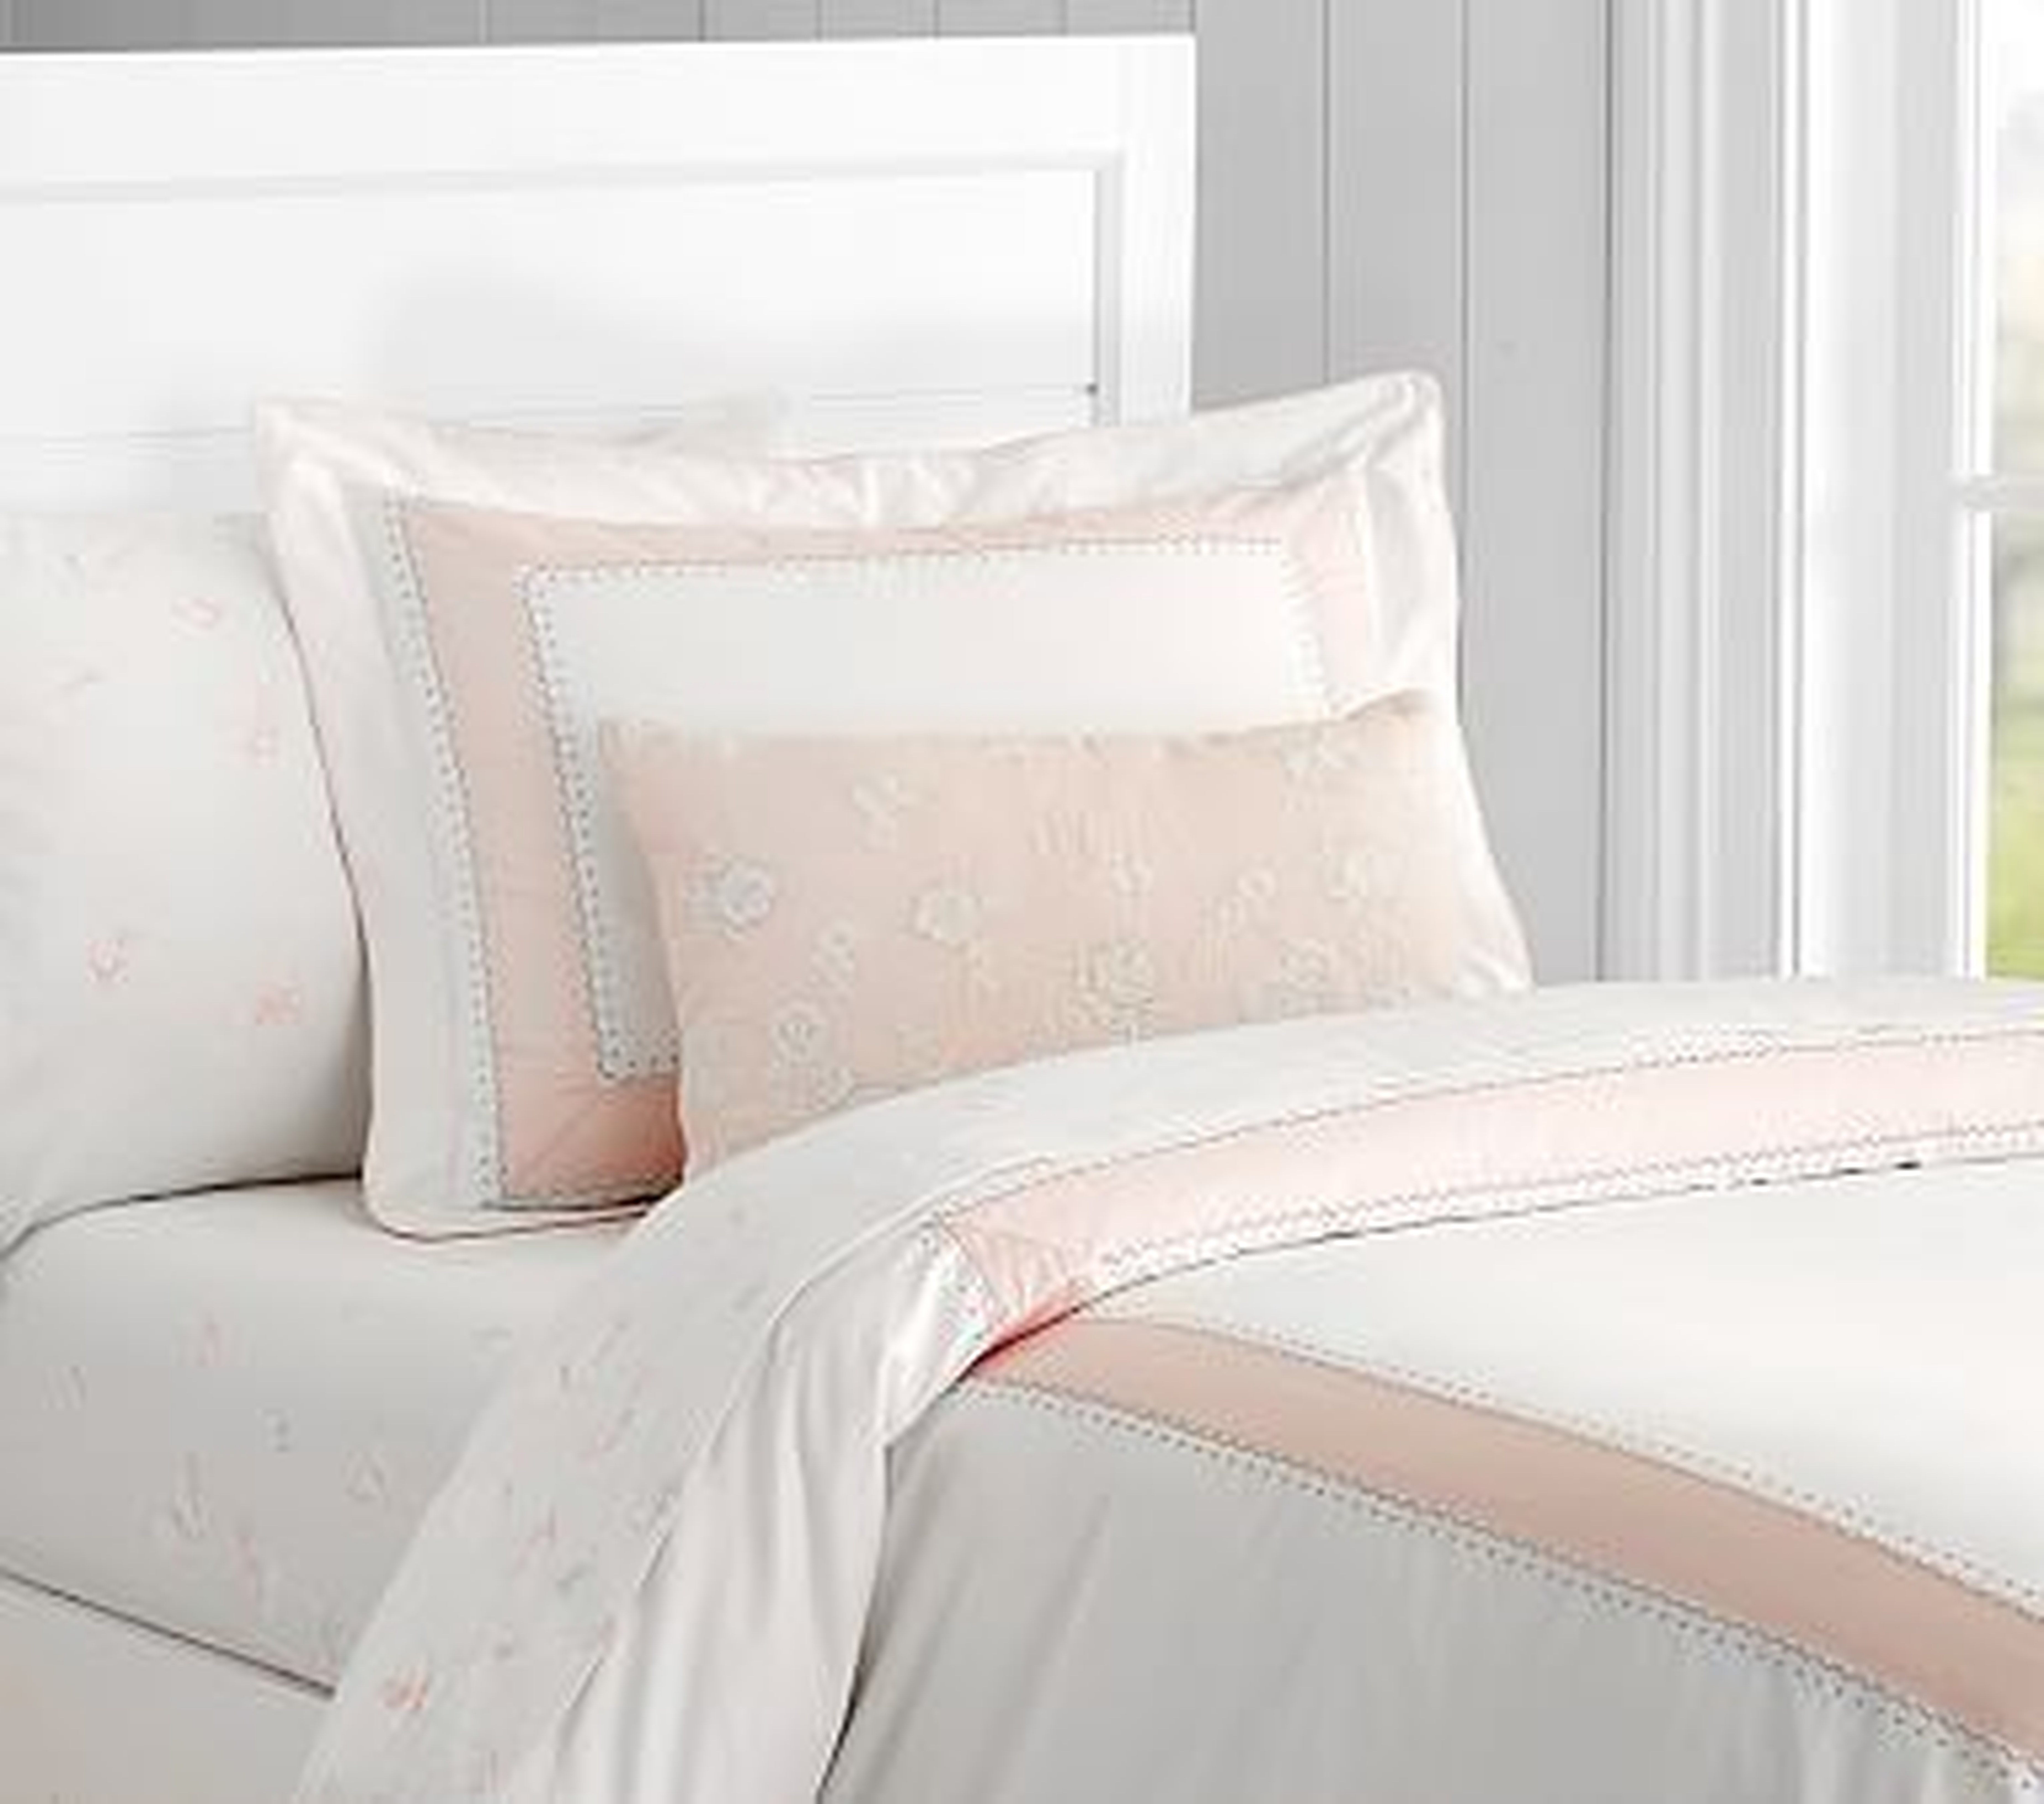 Monique Lhuillier Ethereal Pieced Duvet : Twin : Blush Pink - Pottery Barn Kids